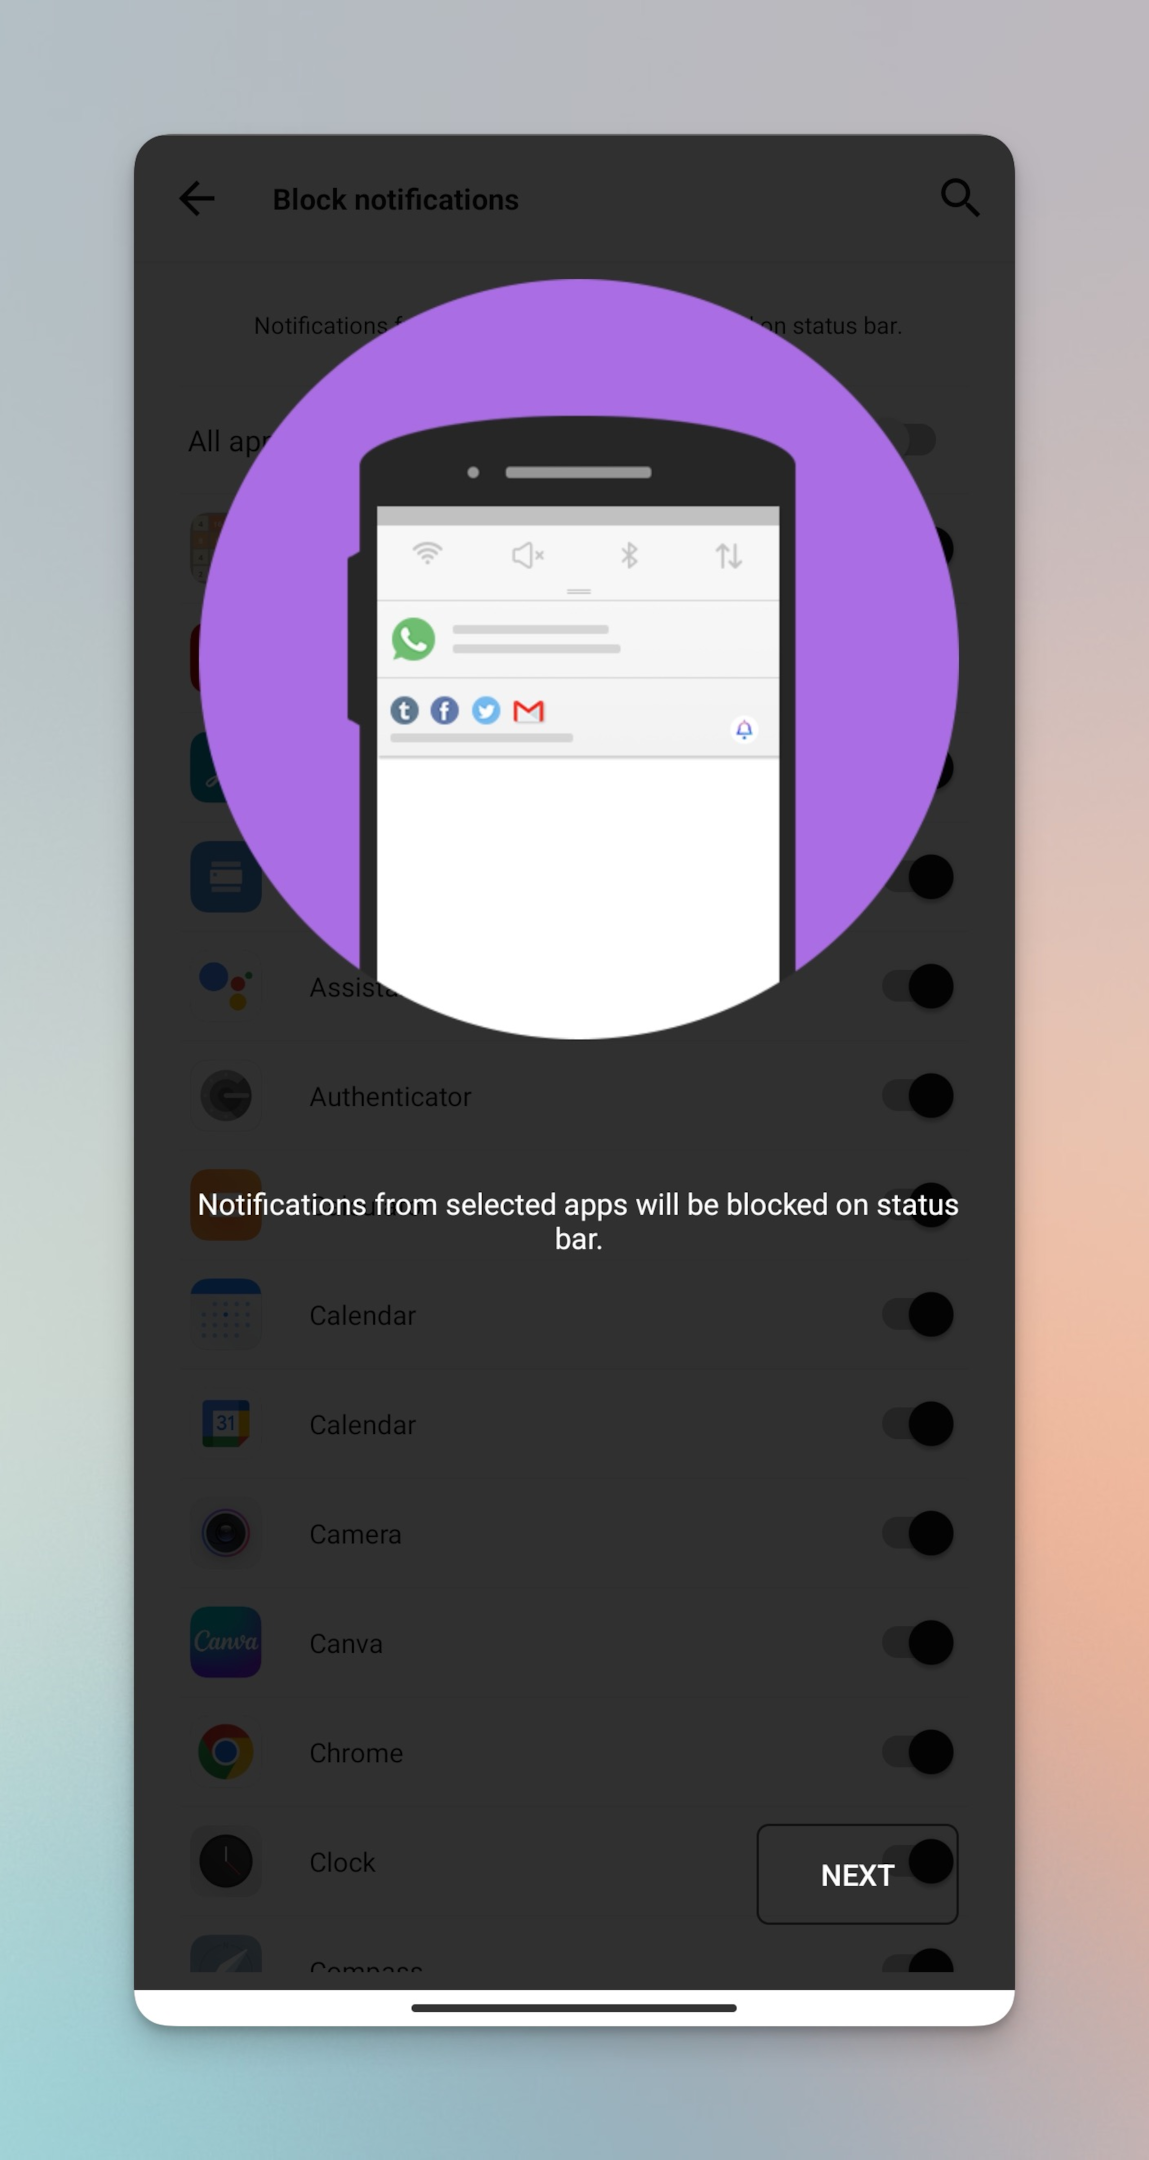 Remote.tools shows how to block notifications of all the apps on Notisave